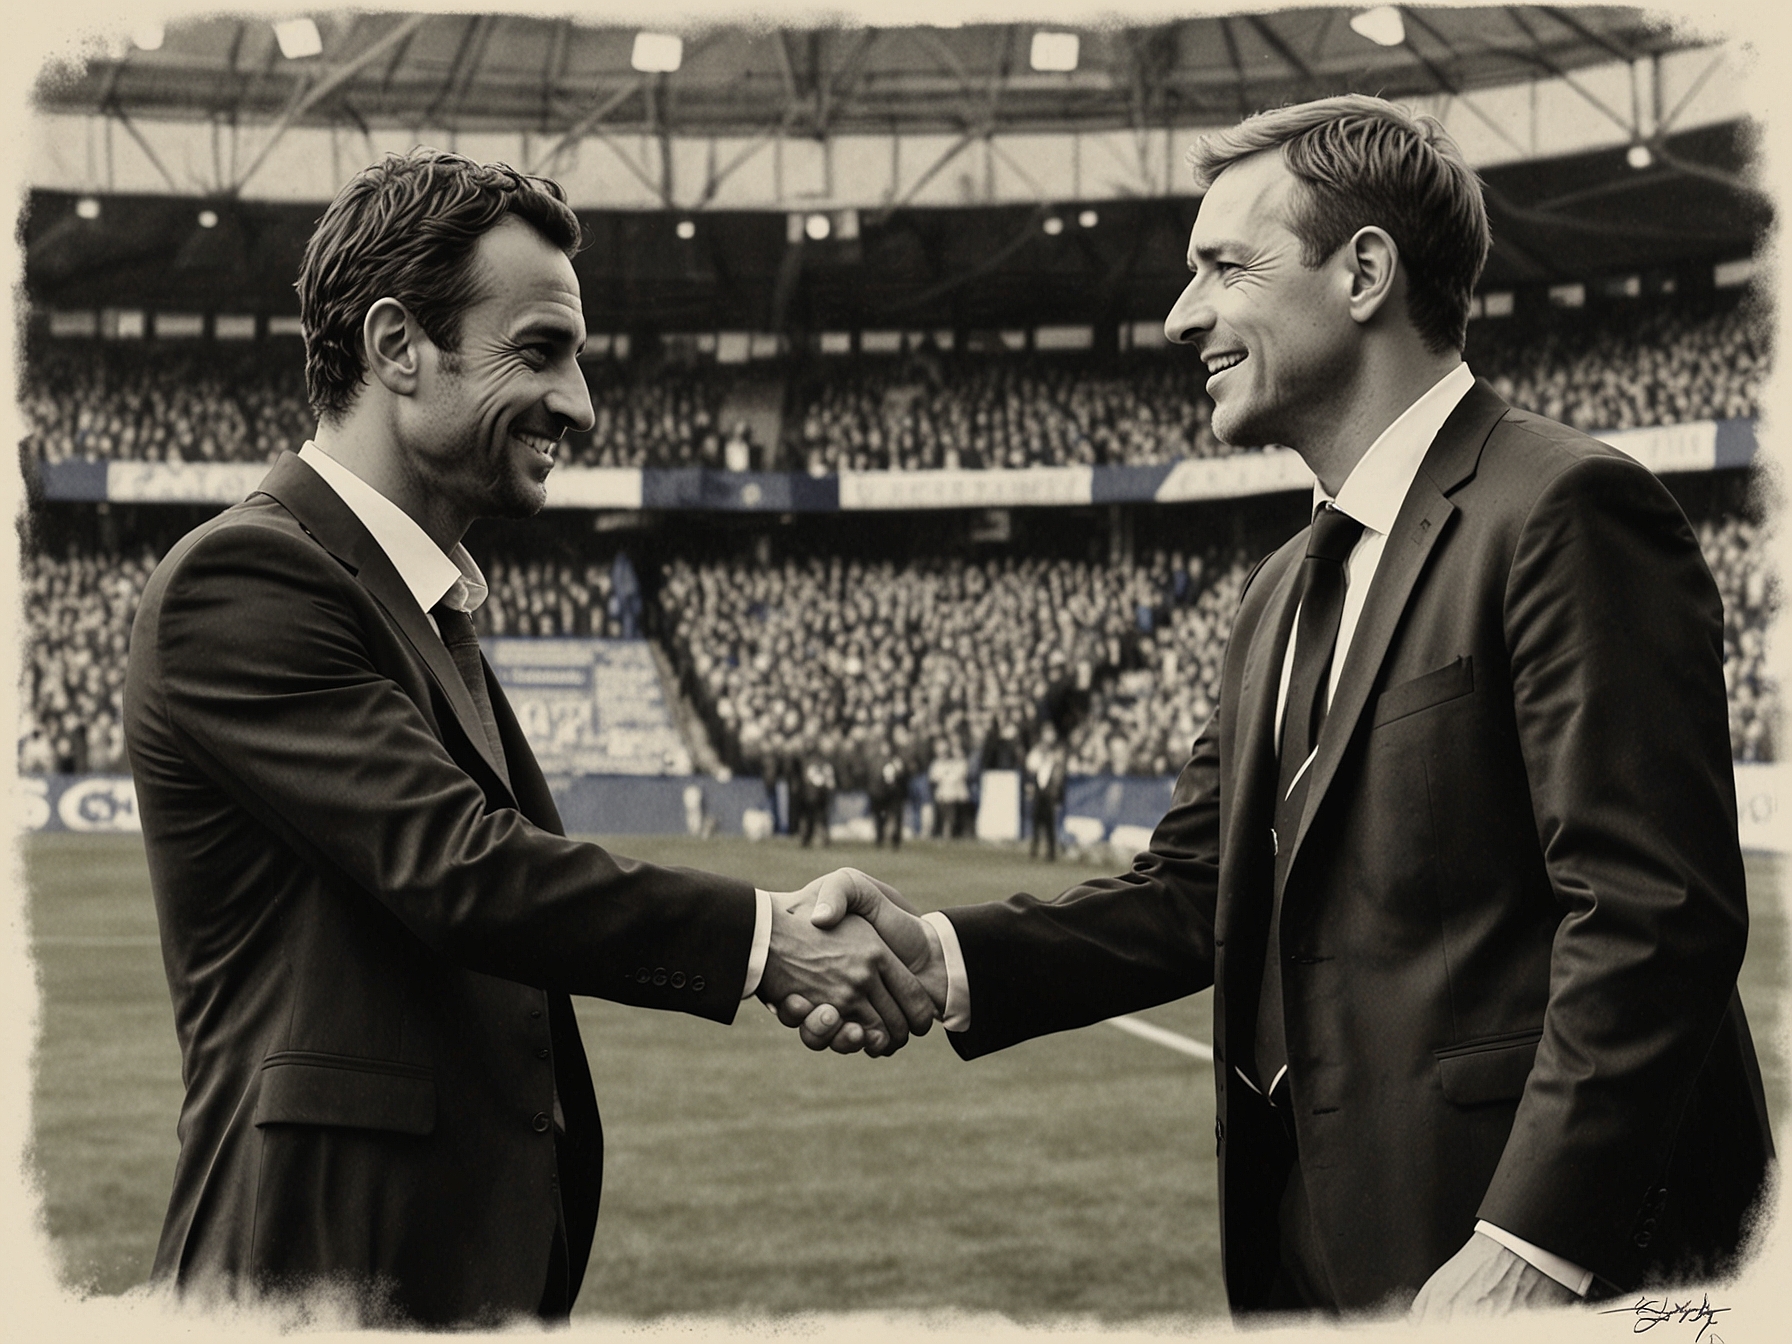 Chelsea's manager Enzo Maresca welcomes Kiernan Dewsbury-Hall with a handshake at Stamford Bridge, symbolizing the player's new journey and potential impact at the club.